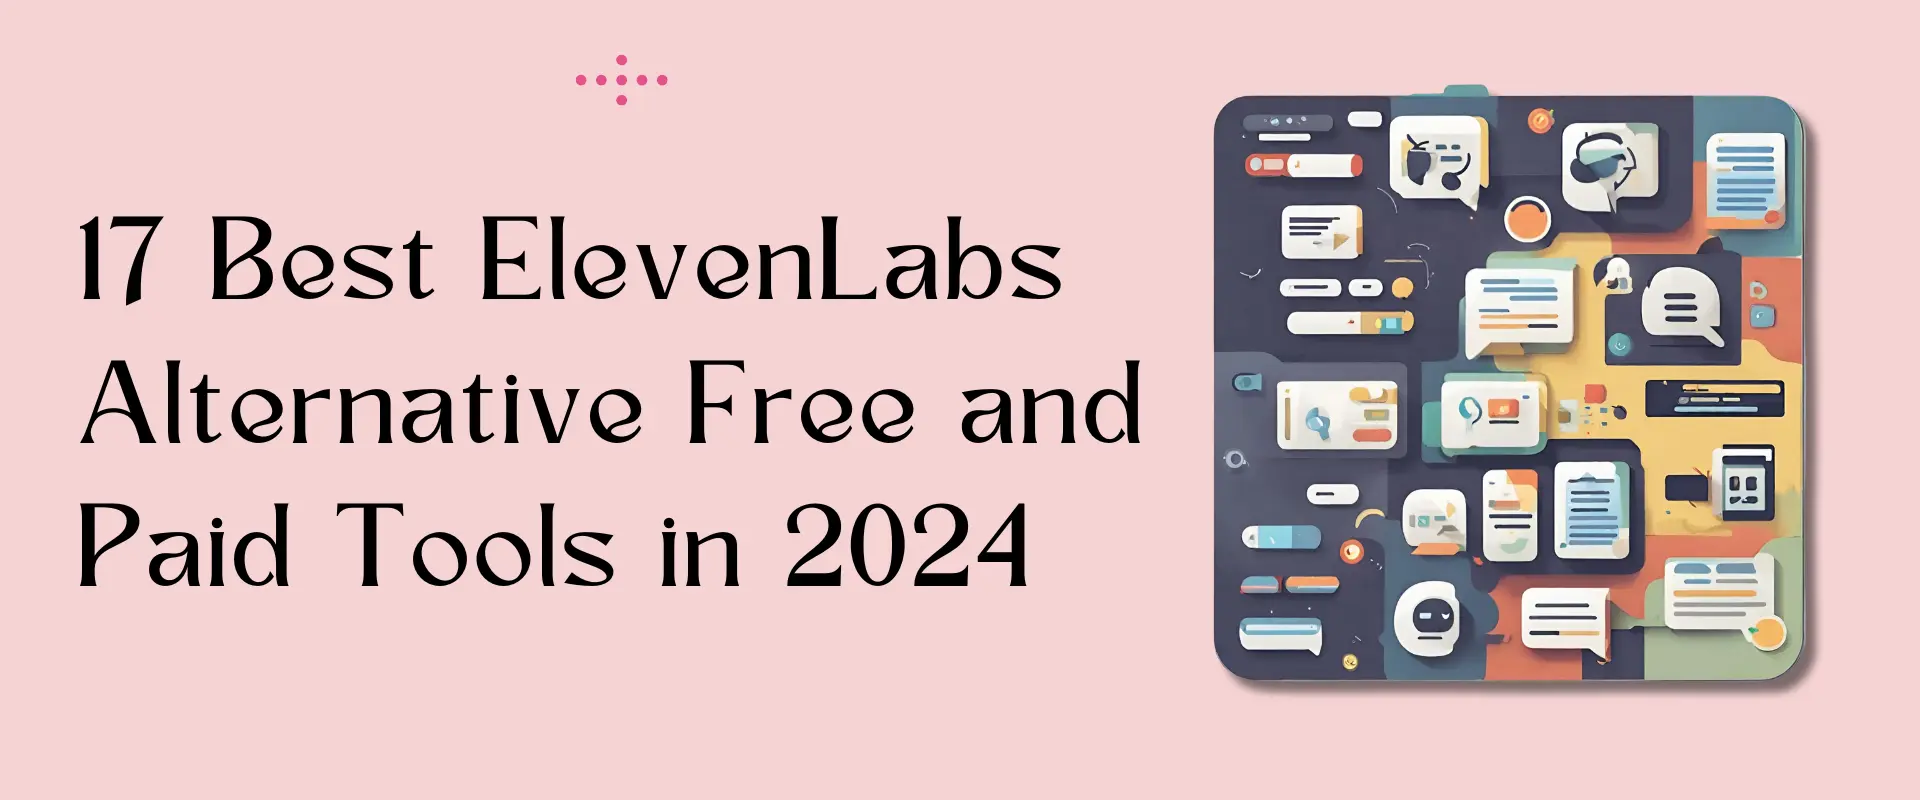 elevenlabs alternative free and paid tools